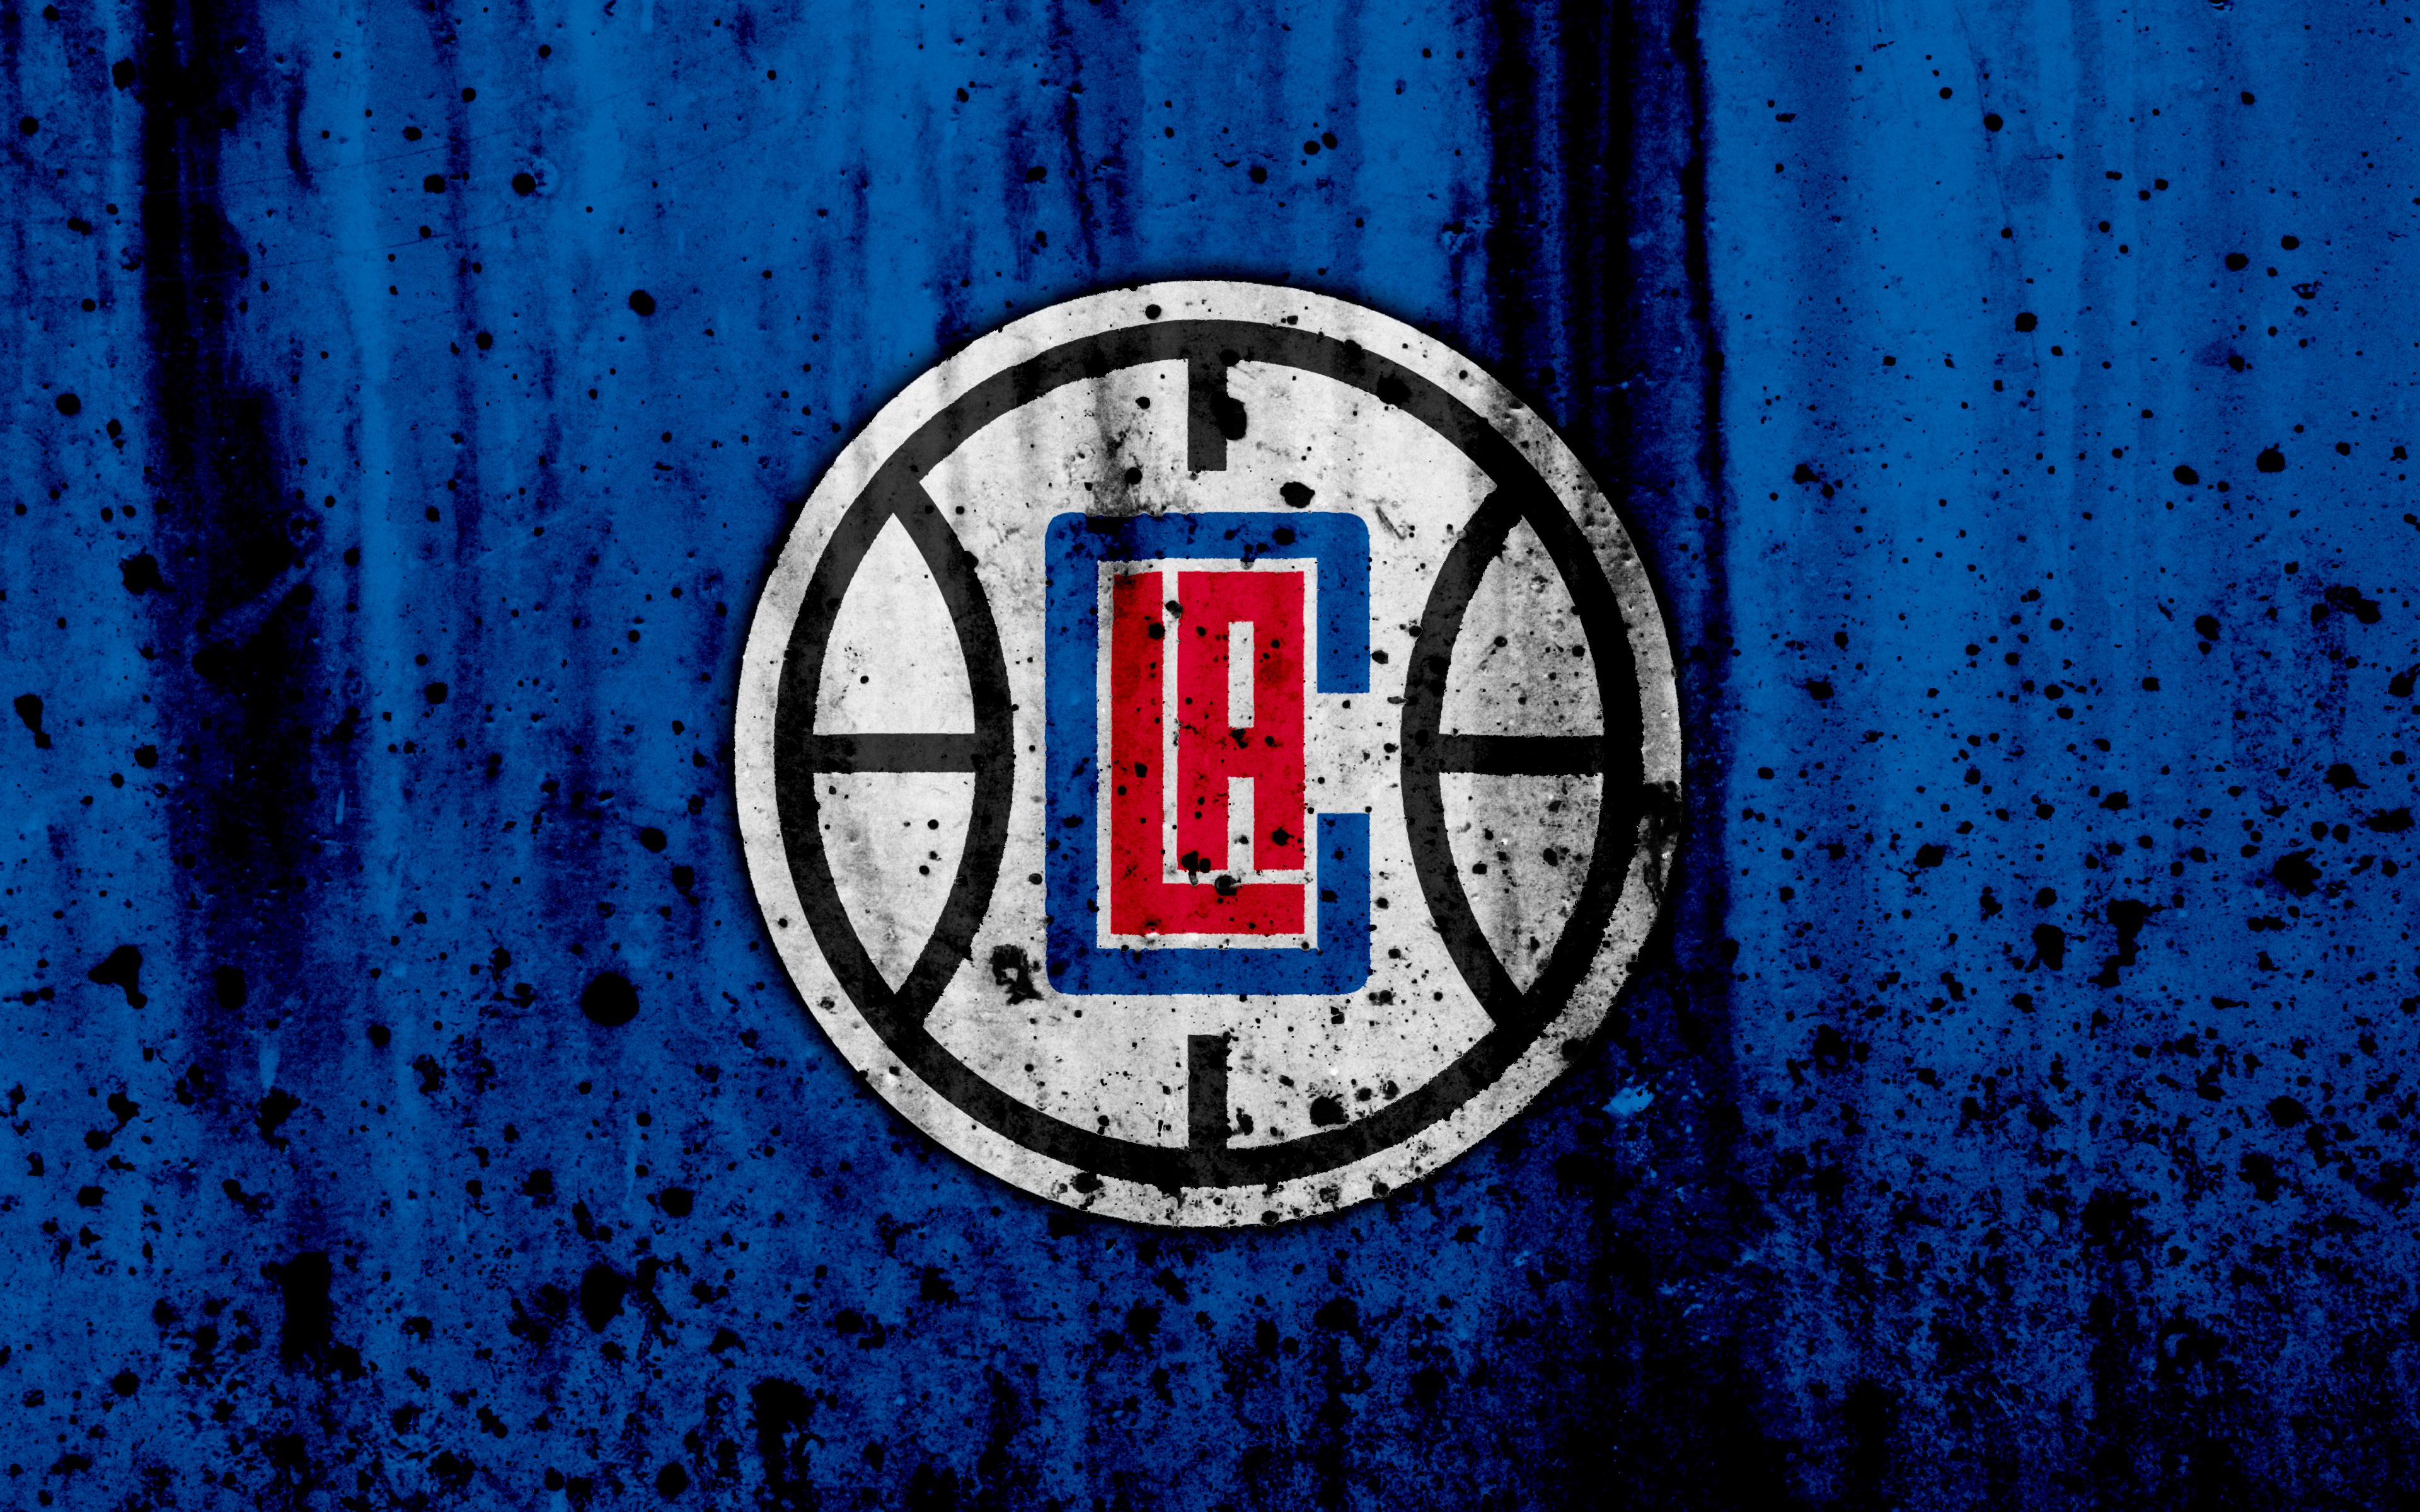 Los Angeles Clippers Logo 4k Ultra HD Wallpaper. Background